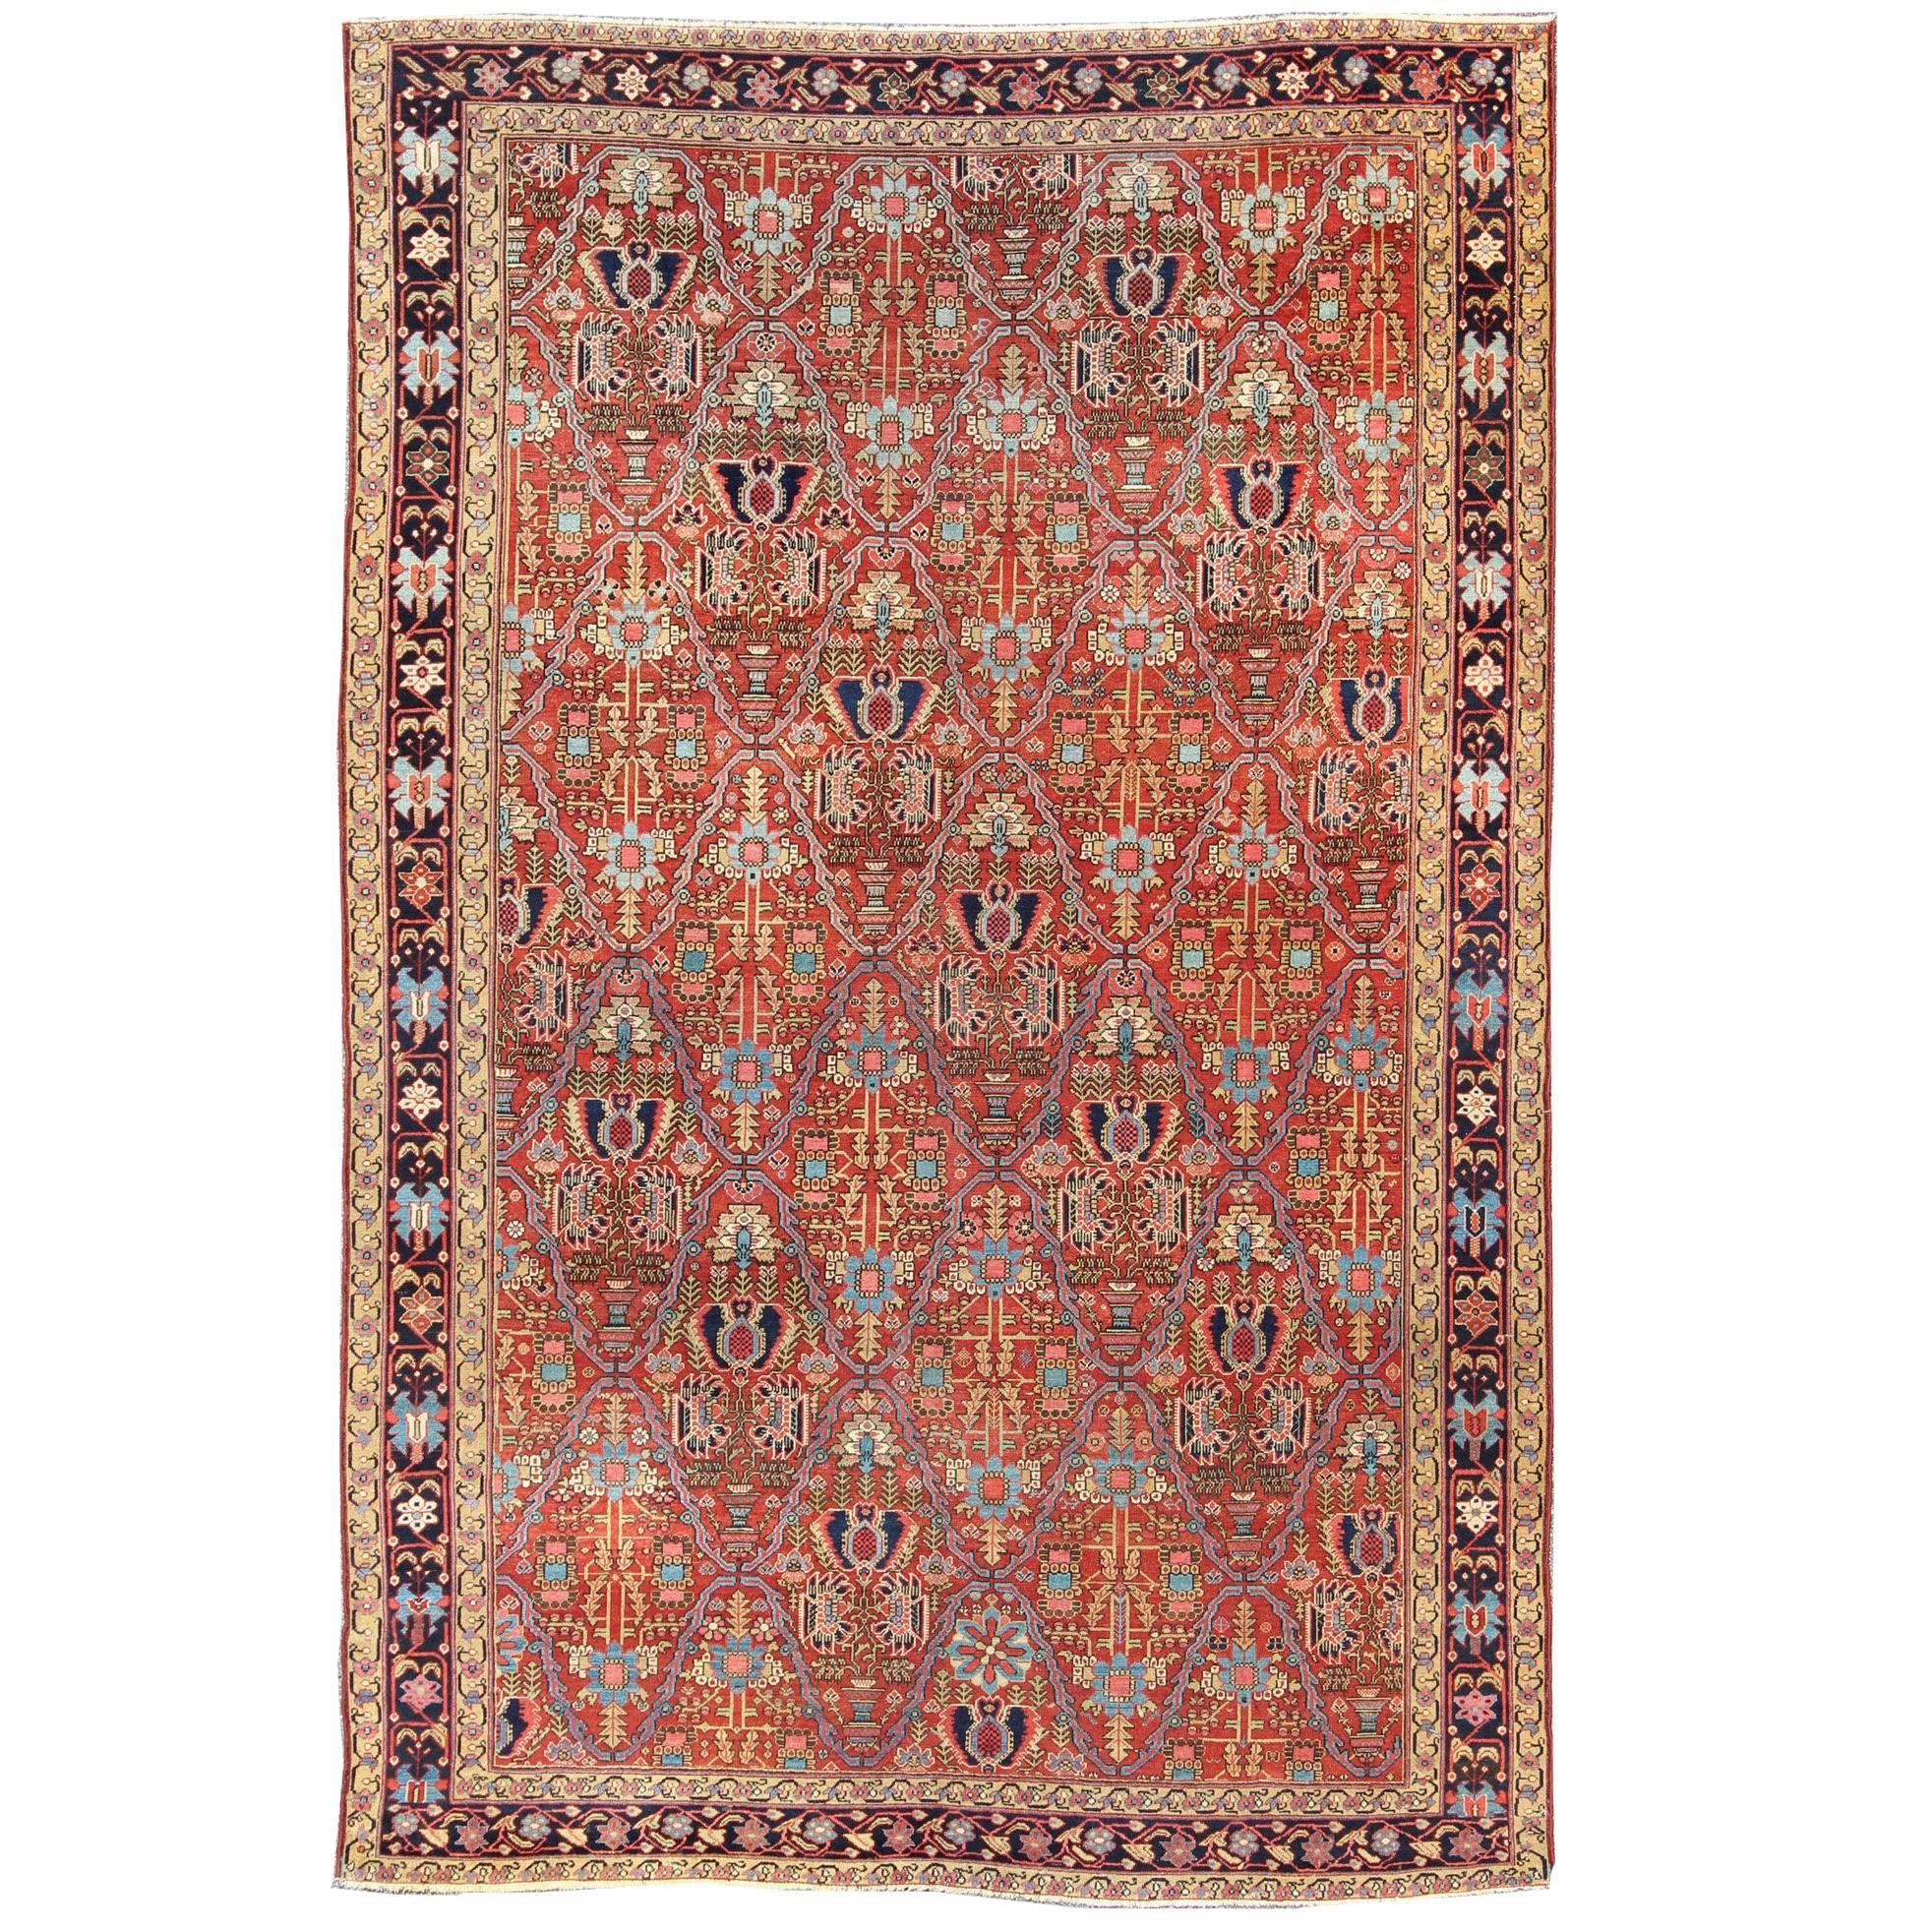 Antique 19th Century Persian Malayer Rug in All Over Geometric Design